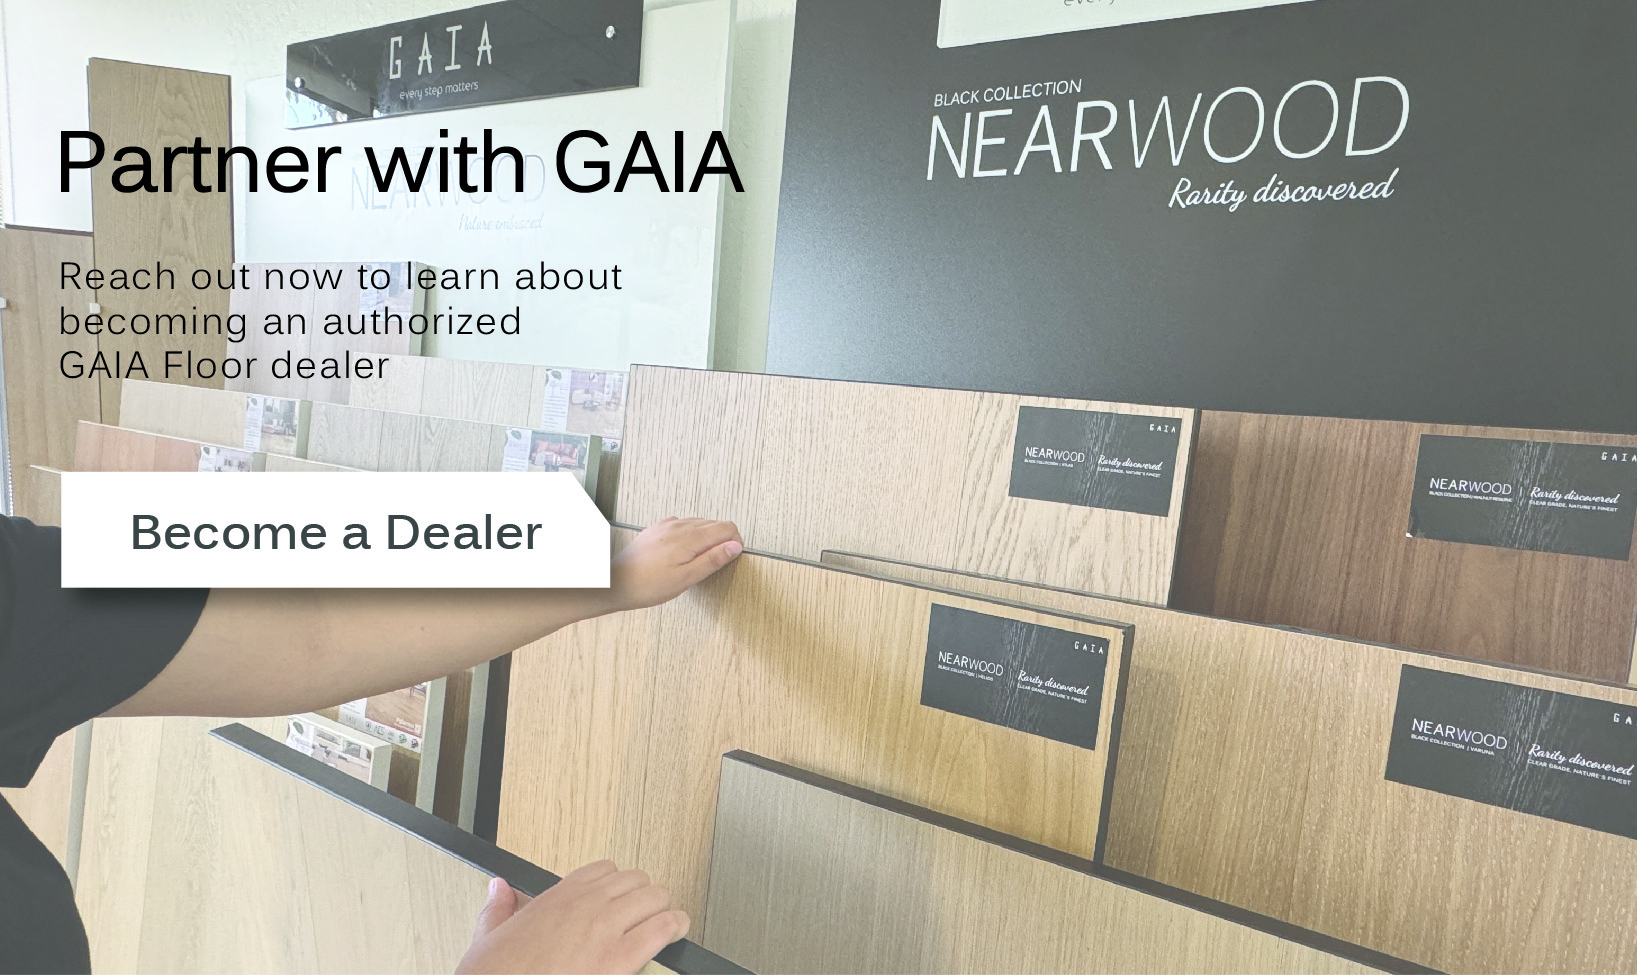 Partner With GAIA